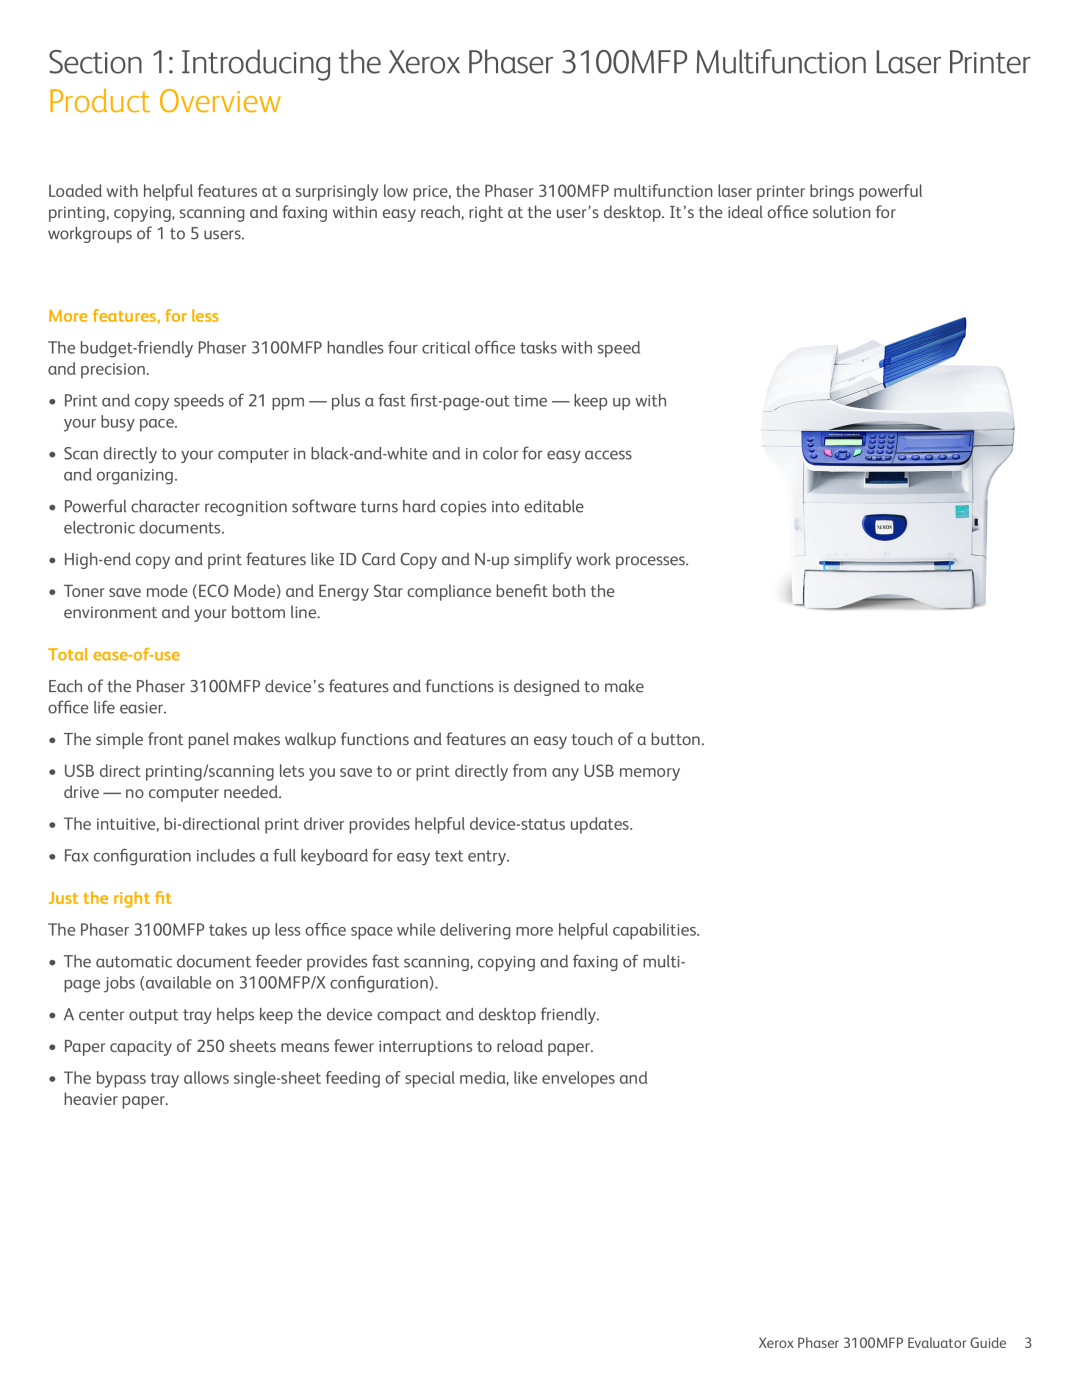 Xerox manual More features, for less, Total ease-of-use, Just the right fit, Xerox Phaser 3100MFP Evaluator Guide 